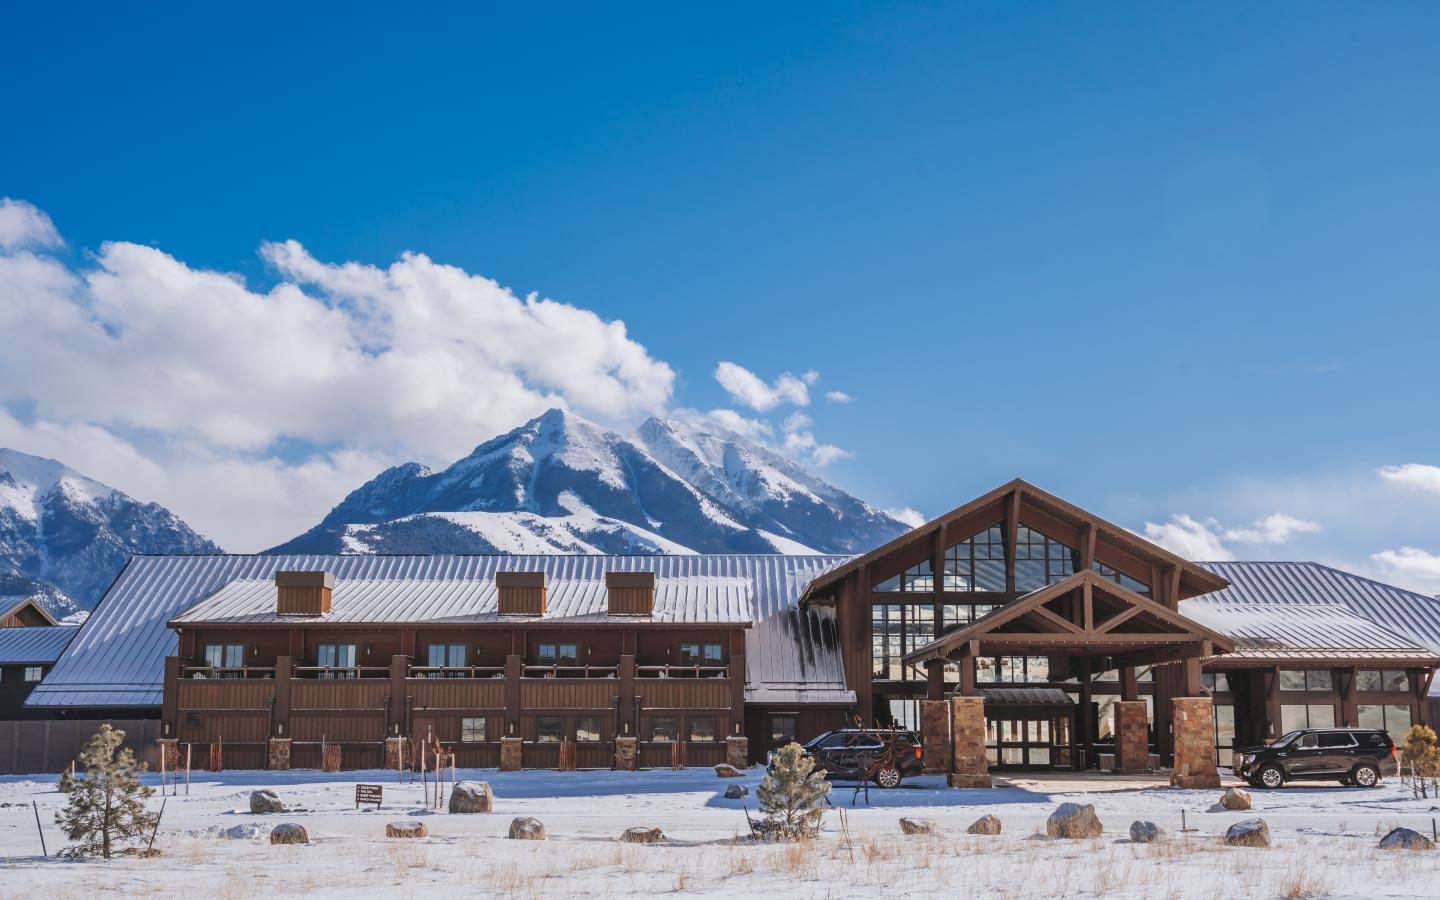 11 Best Places to Stay in Yellowstone National Park